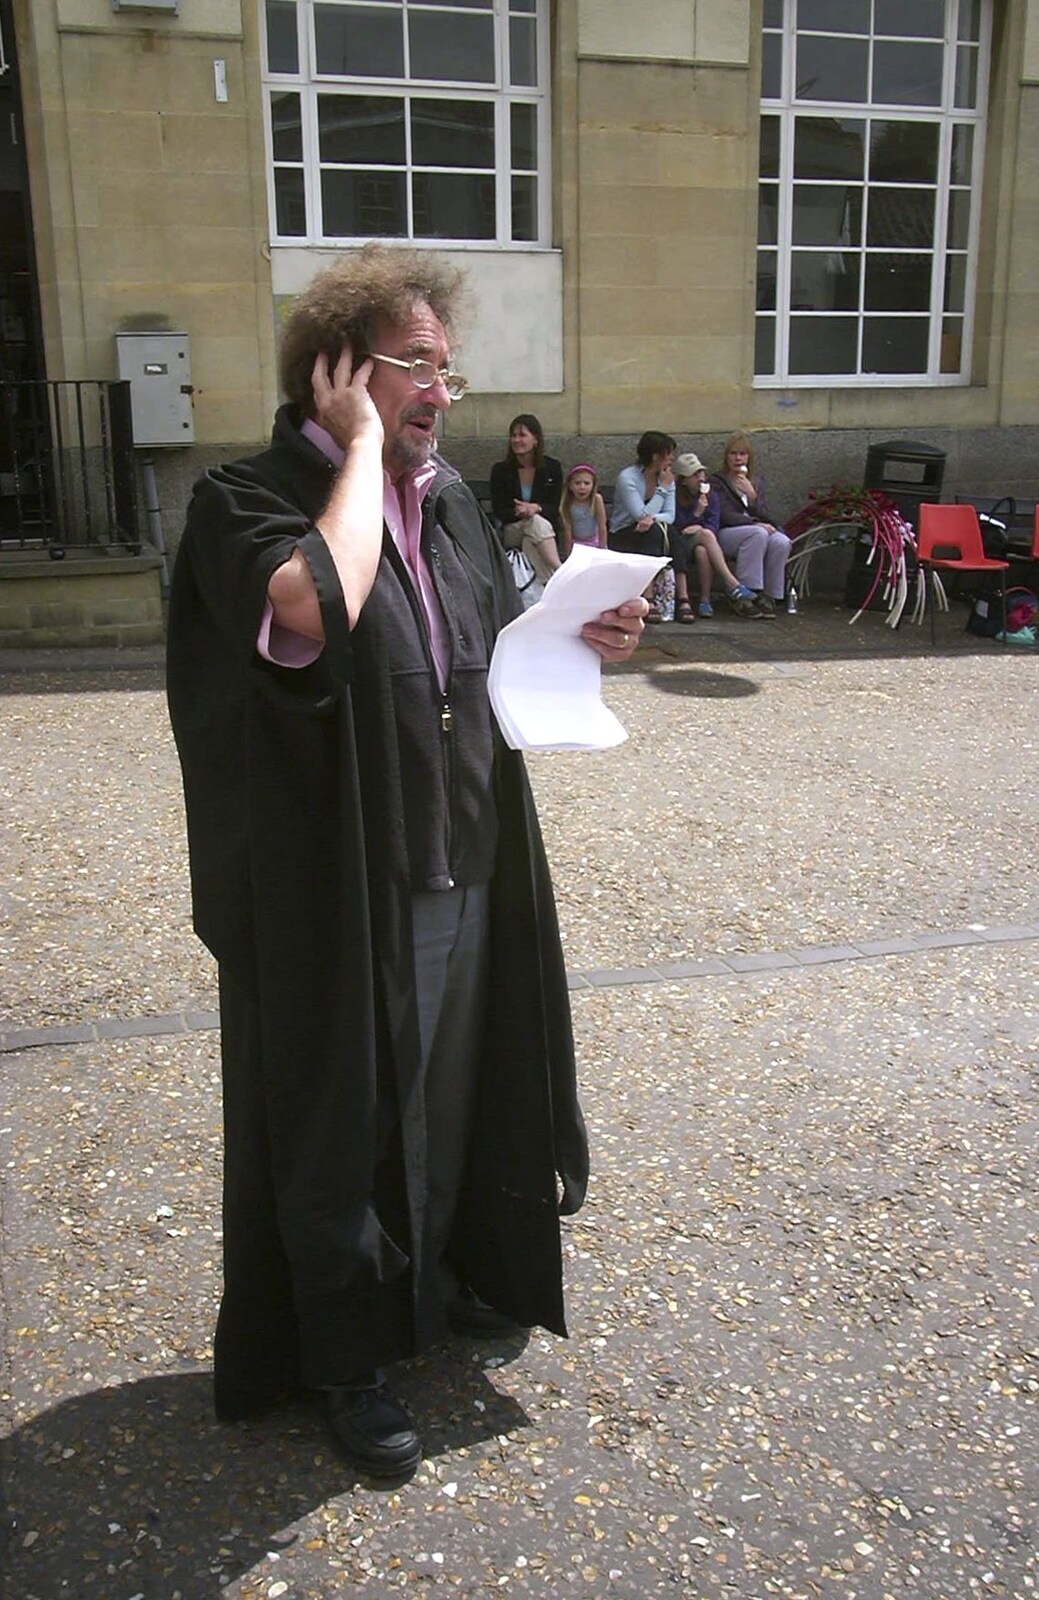 Some readings from Skelton's works from Andrey Leaves Trigenix, More Skelton Festival and a Transit of Venus, Cambridge and Diss - 4th June 2004